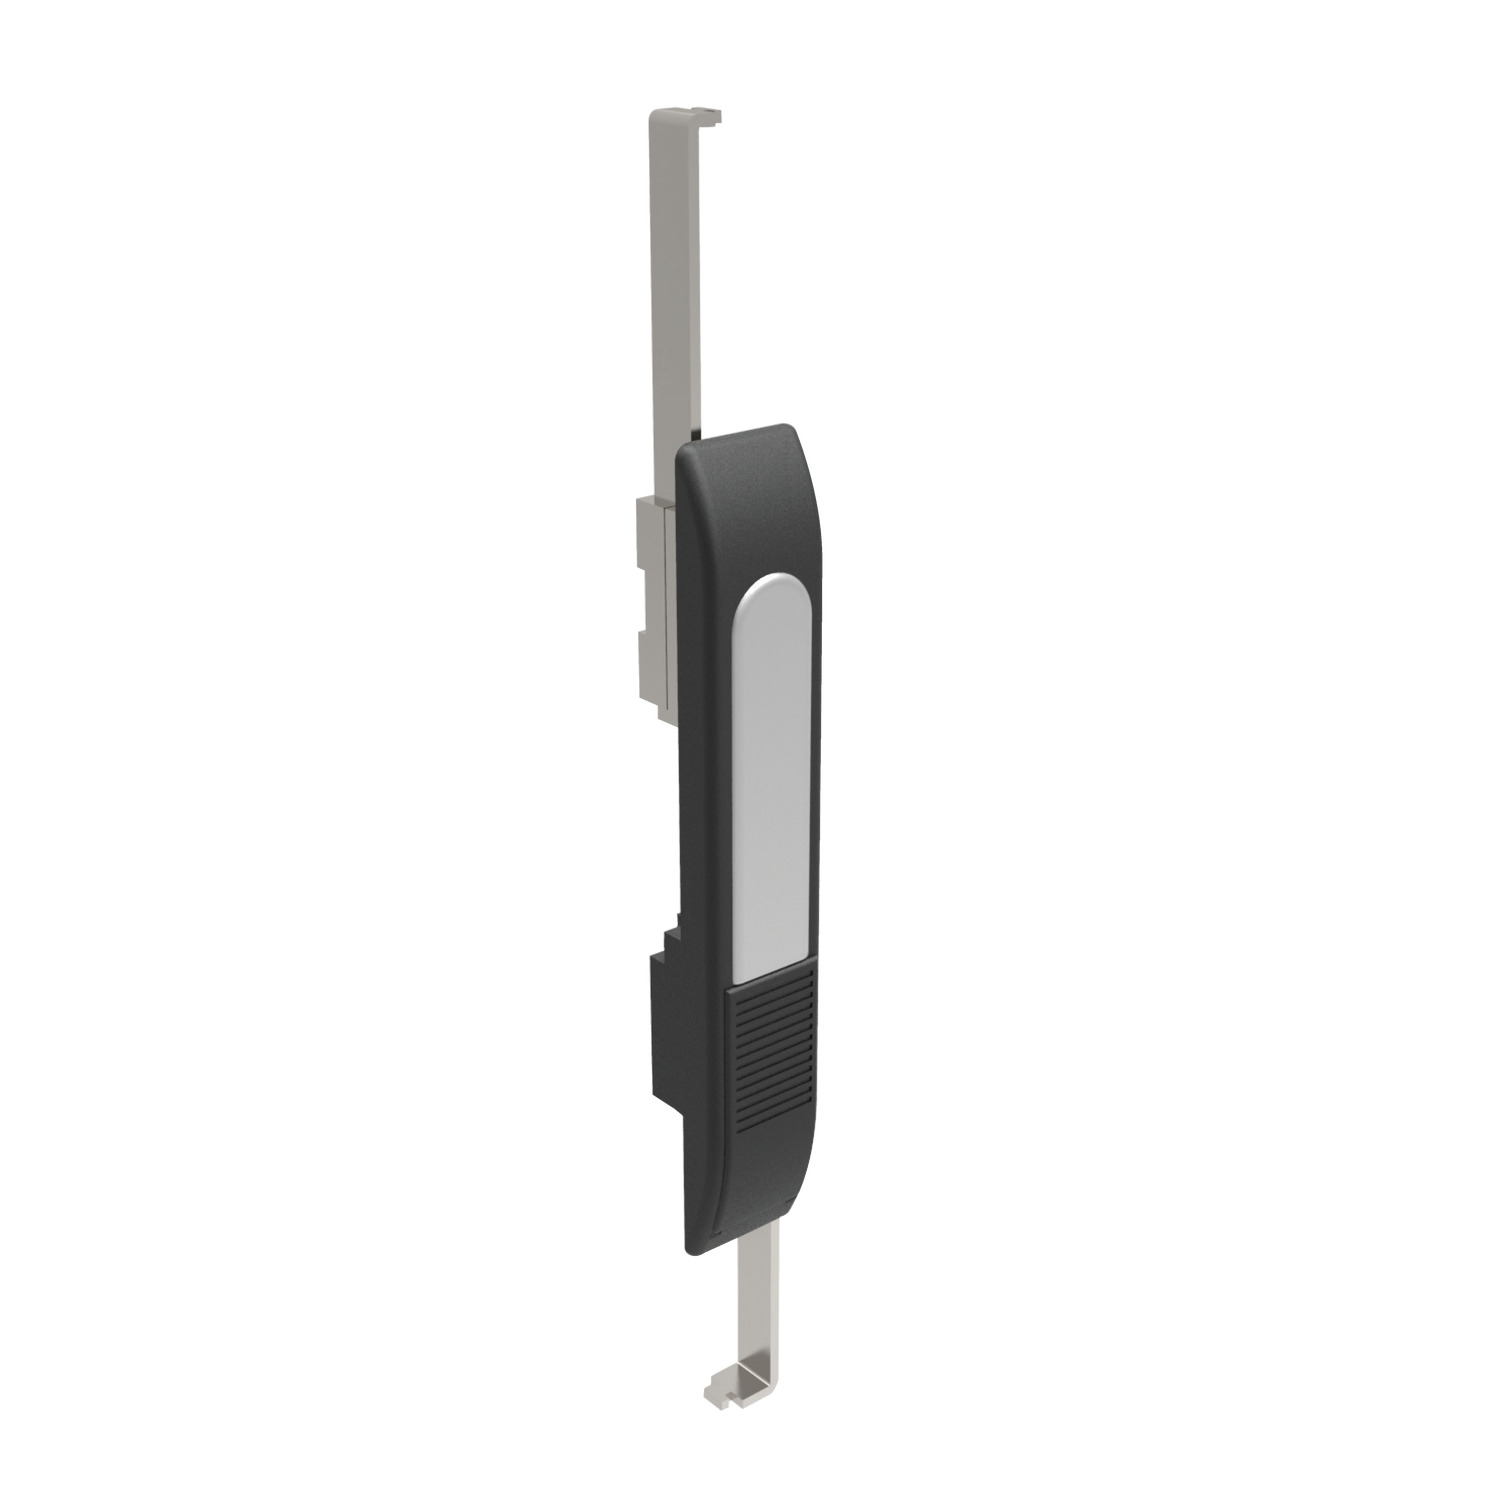 Product B2450, Swing Handles - with Rod Control 40mm euro cylinder lock - sliding cover - polyamide / 